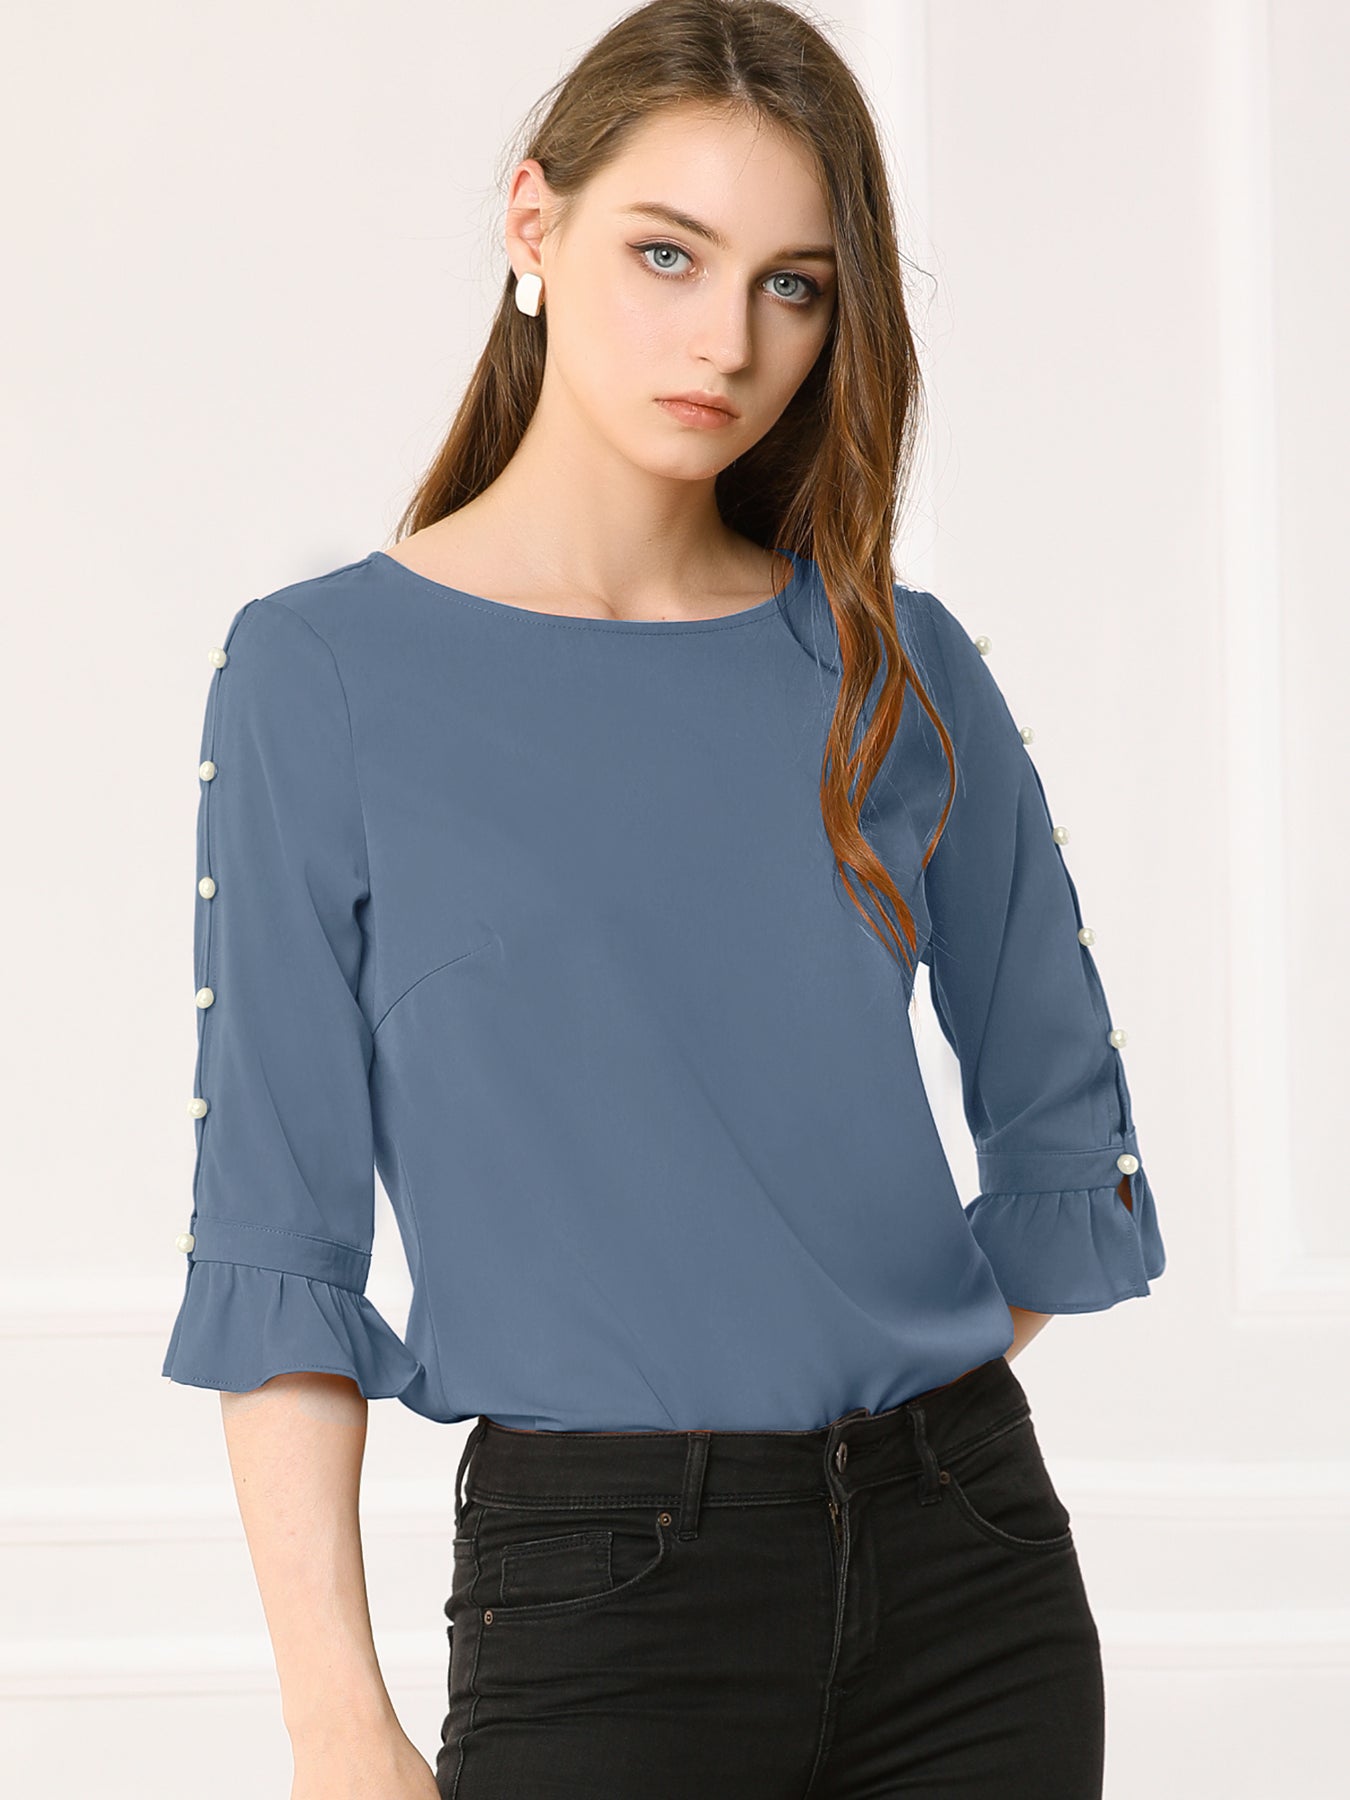 Ruffle Half Sleeve Keyhole Casual Tops Button Solid Blouse Top | Allegra K